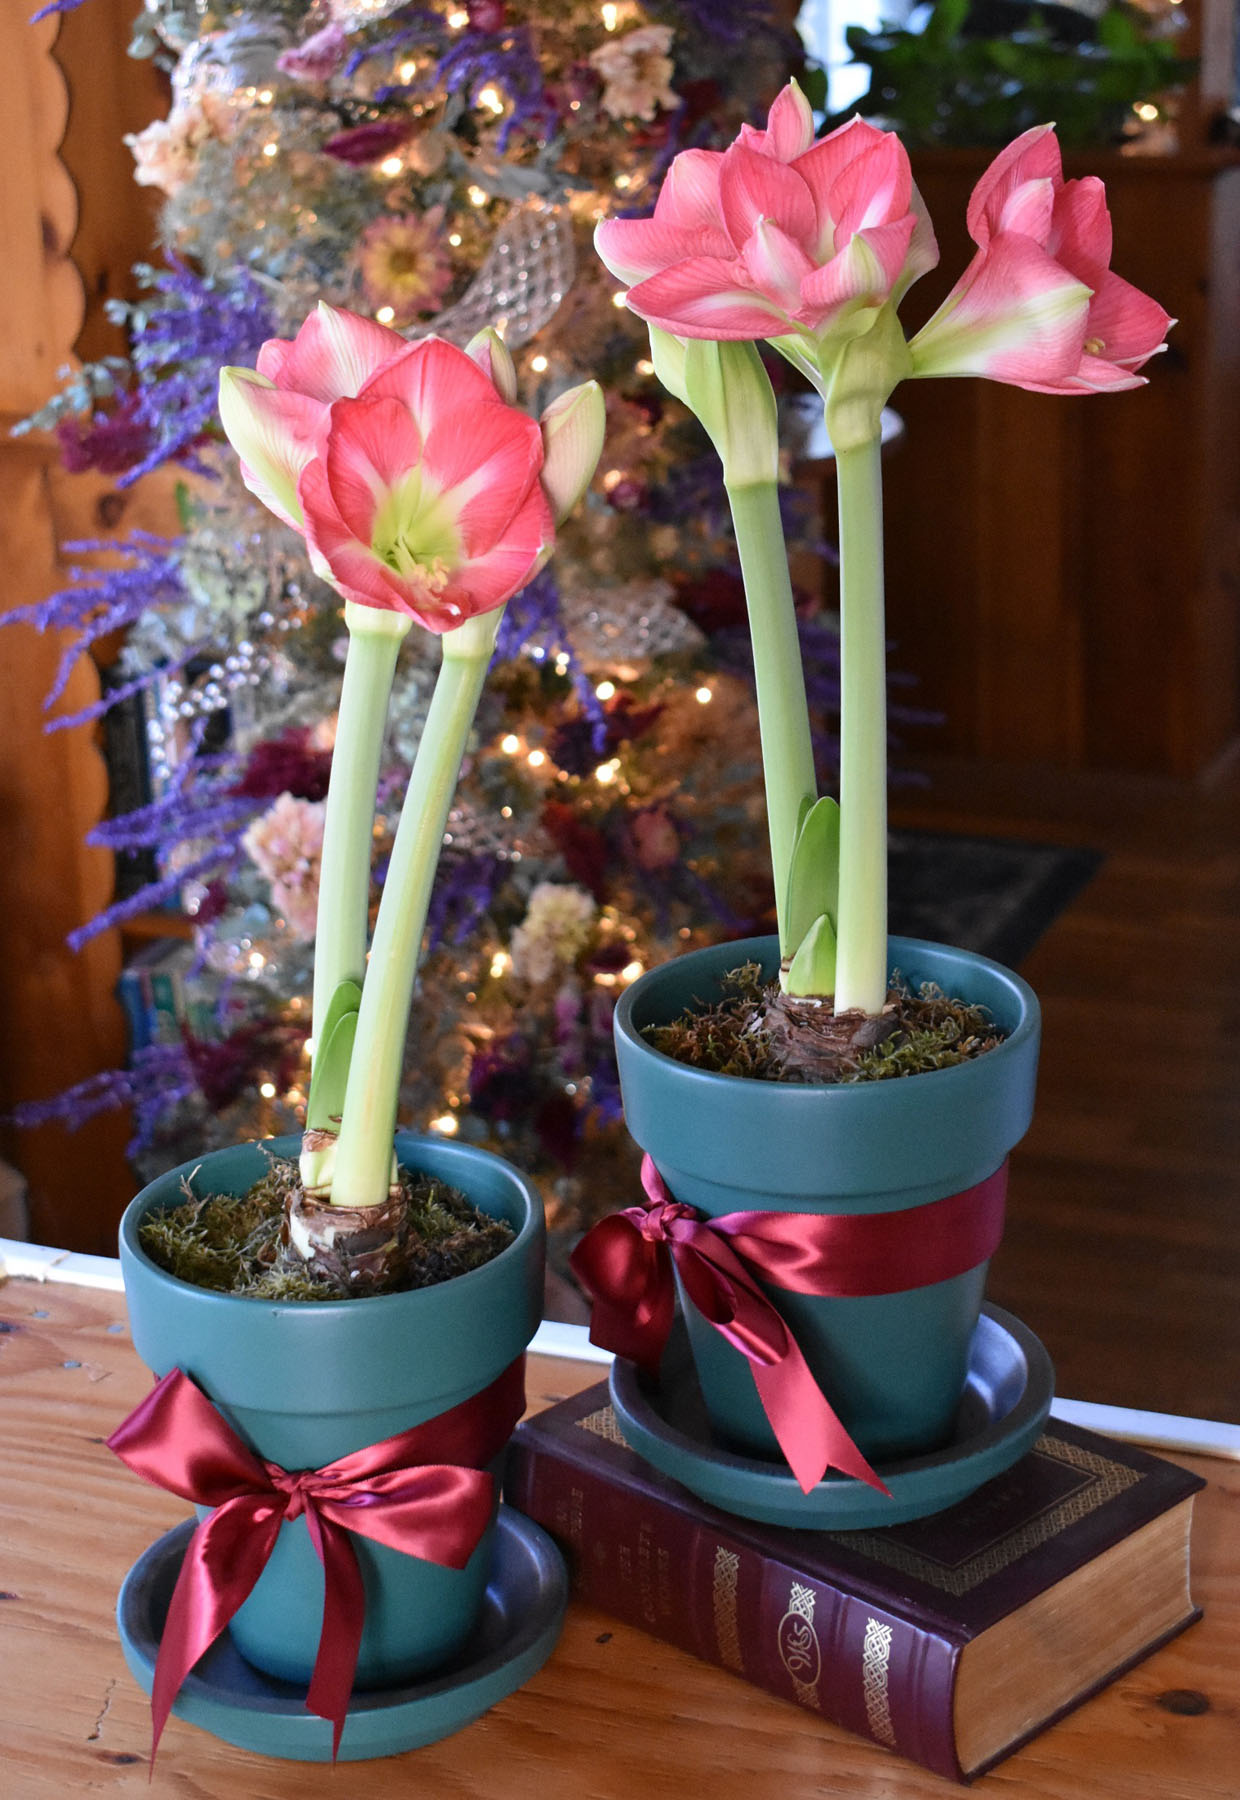 Amaryllis flowers forced from bulbs